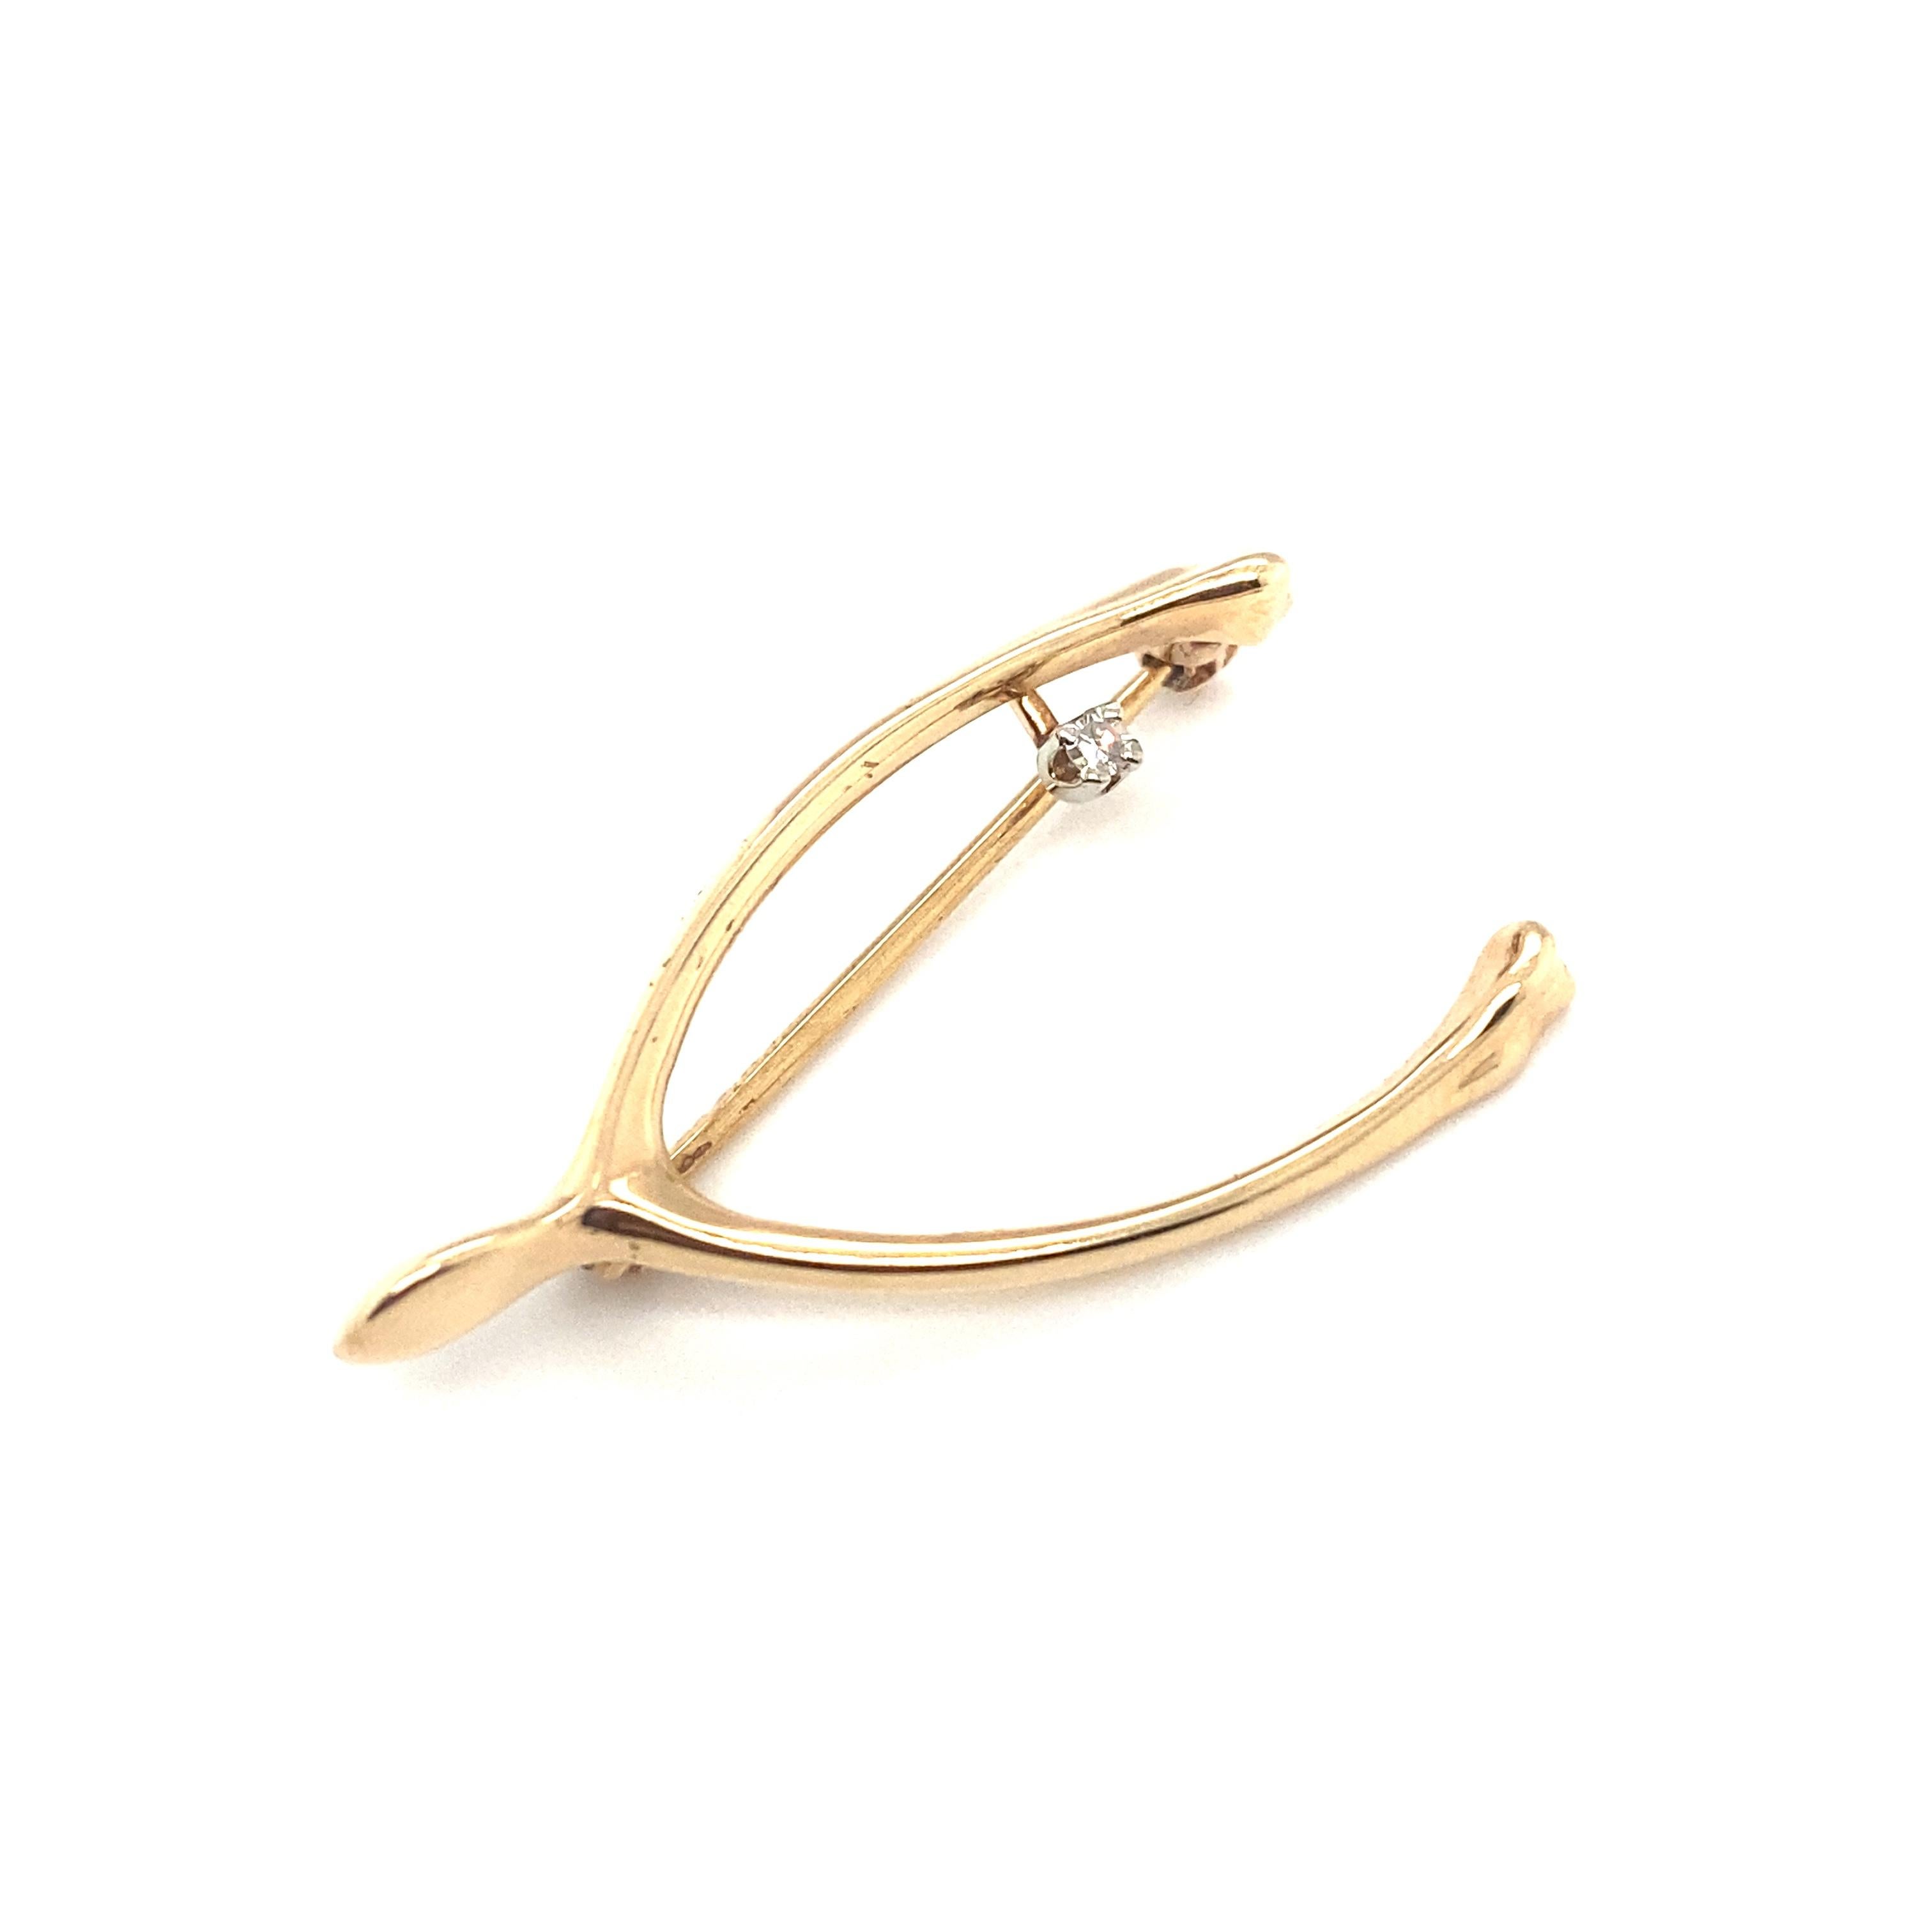 Item Details: This wishbone brooch has a single accent diamond. This brooch is in great condition and can be worn with any ensemble.

Circa: 1960s
Metal Type: 14 Karat Yellow Gold
Weight: 2 grams
Size: 1.25